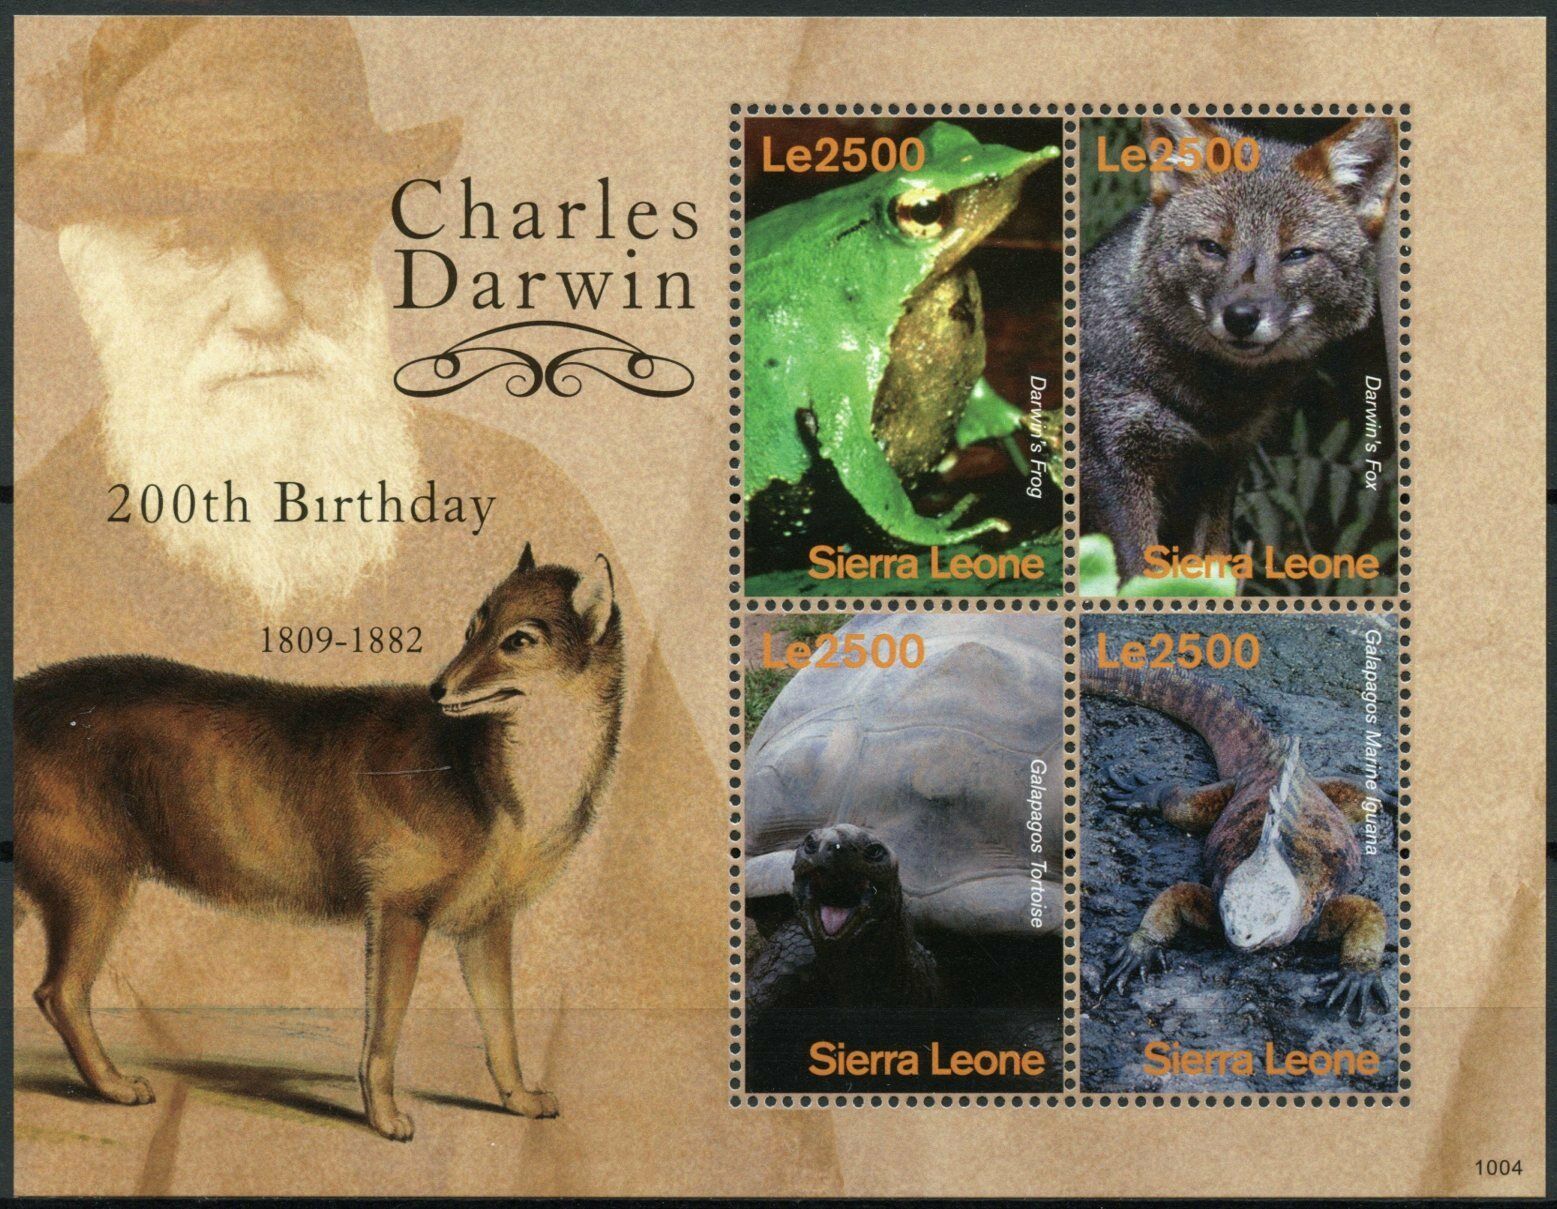 Sierra Leone Animals Stamps 2010 MNH Charles Darwin Frogs Turtles Lizards 4v M/S